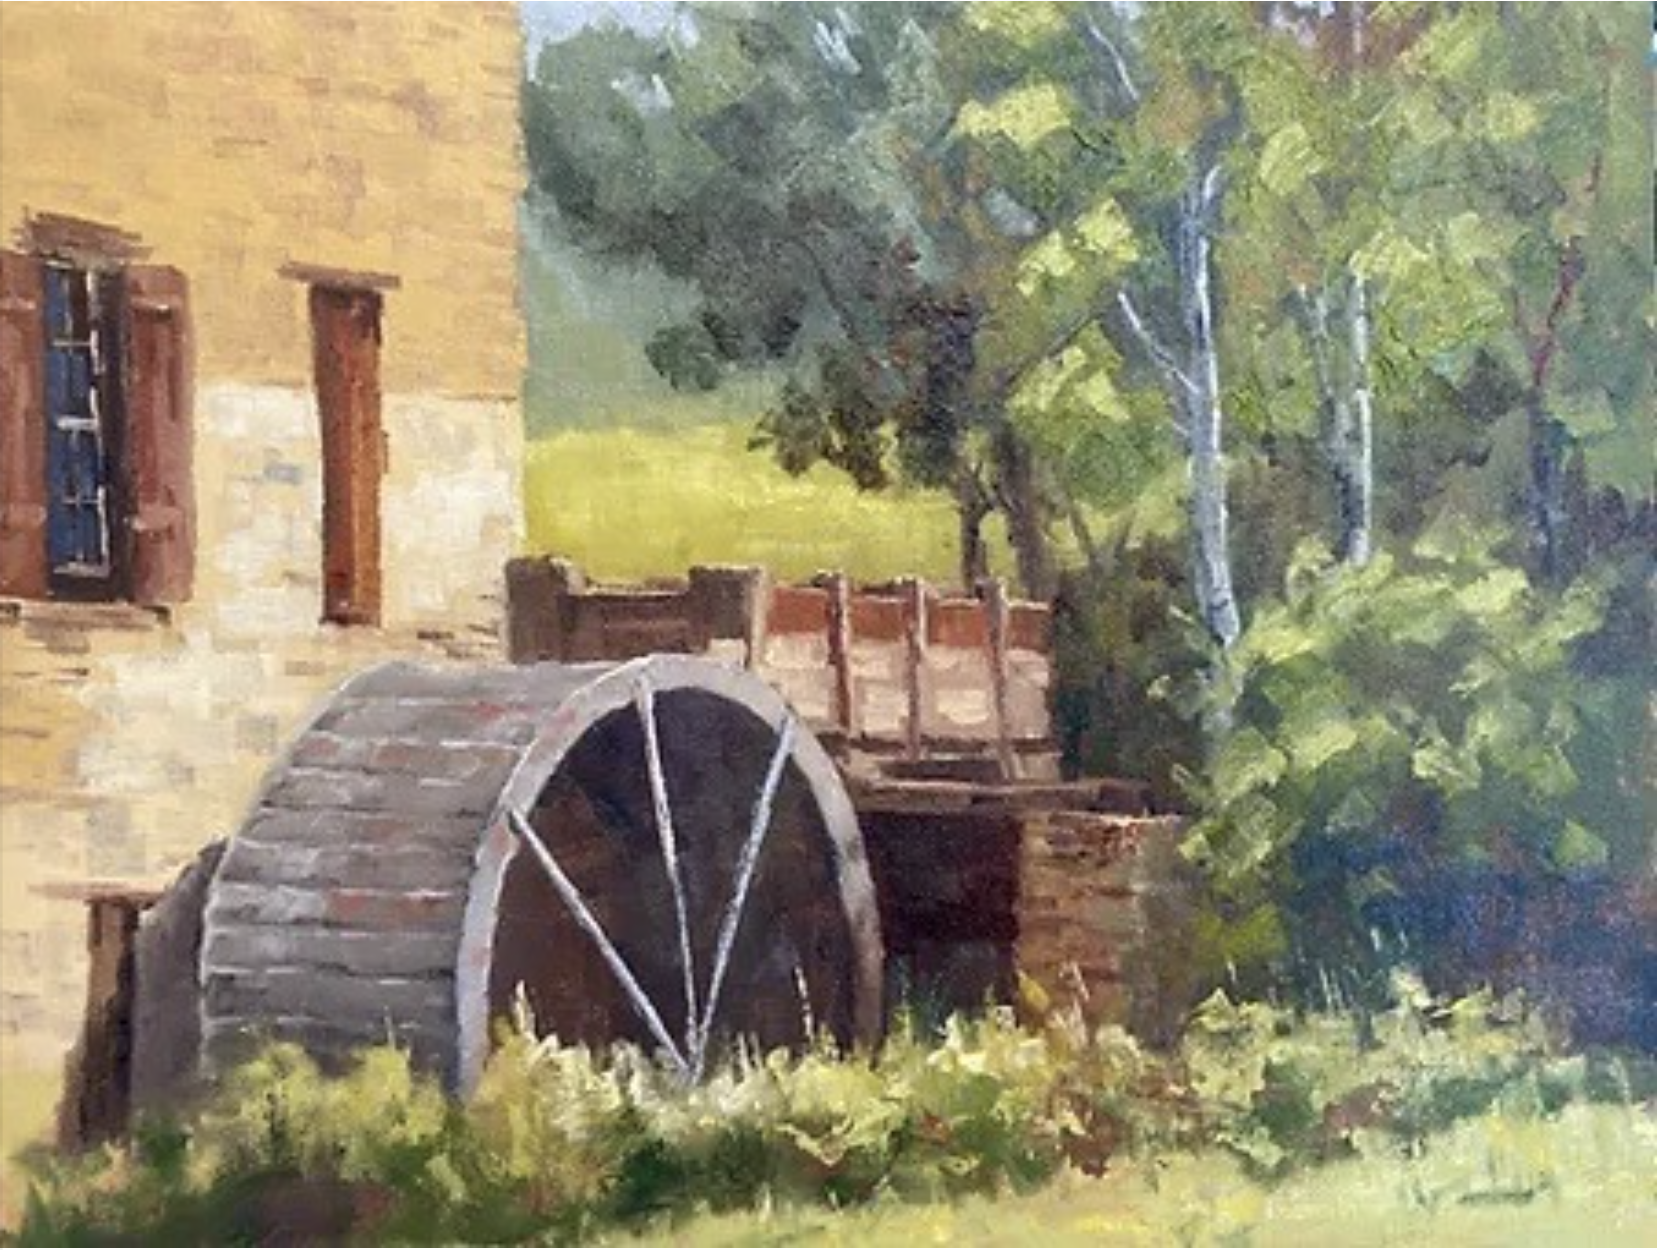 Image: Painting of a Water Wheel